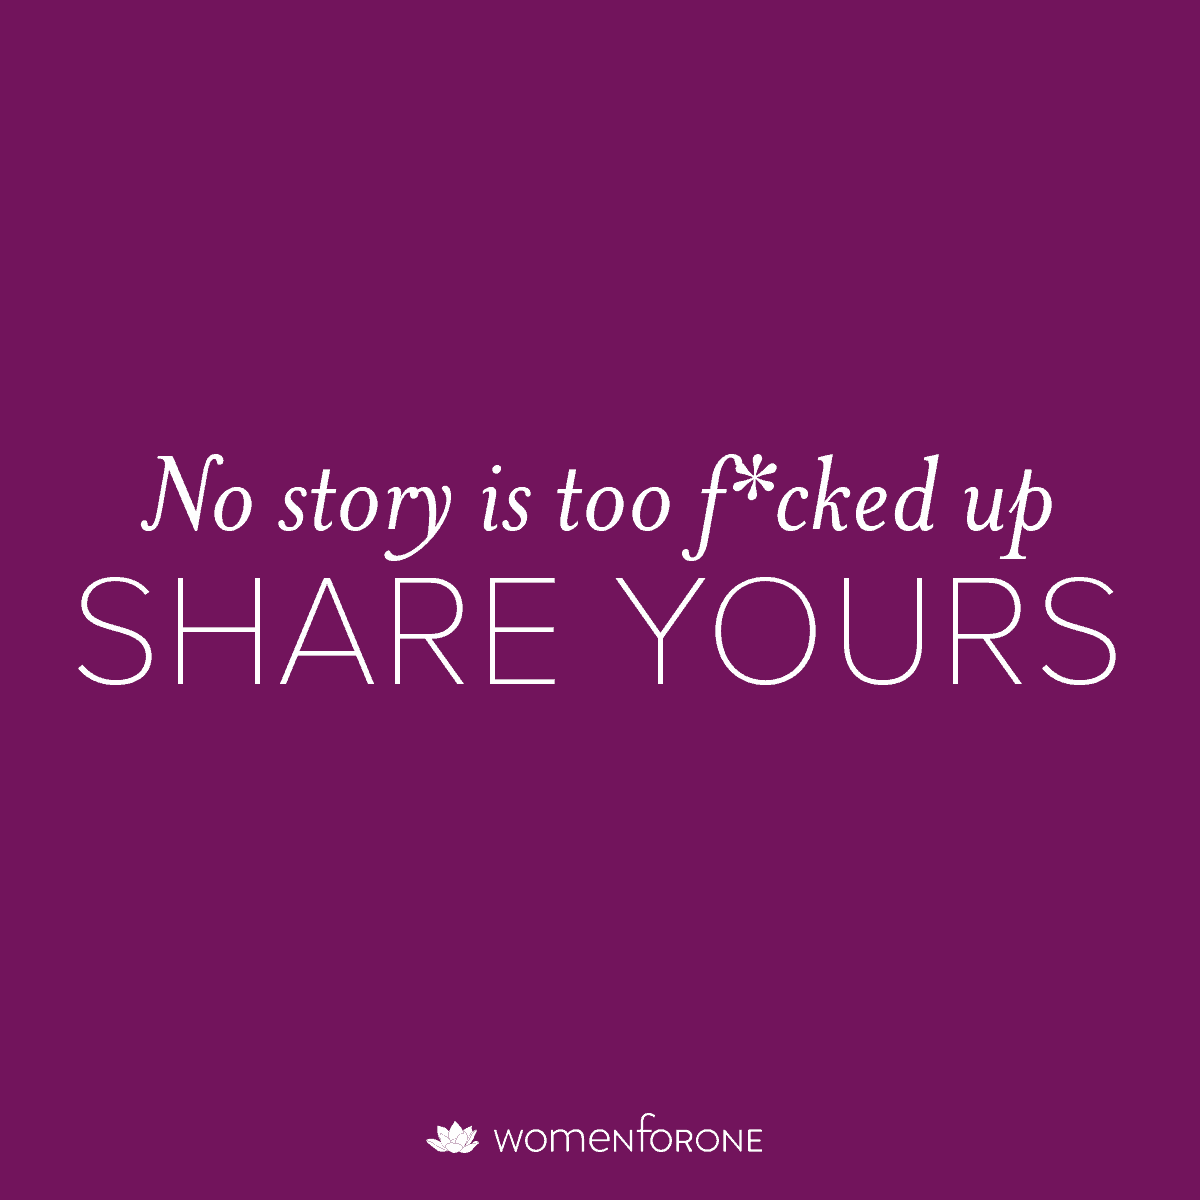 No story is too f*cked up. Share yours.